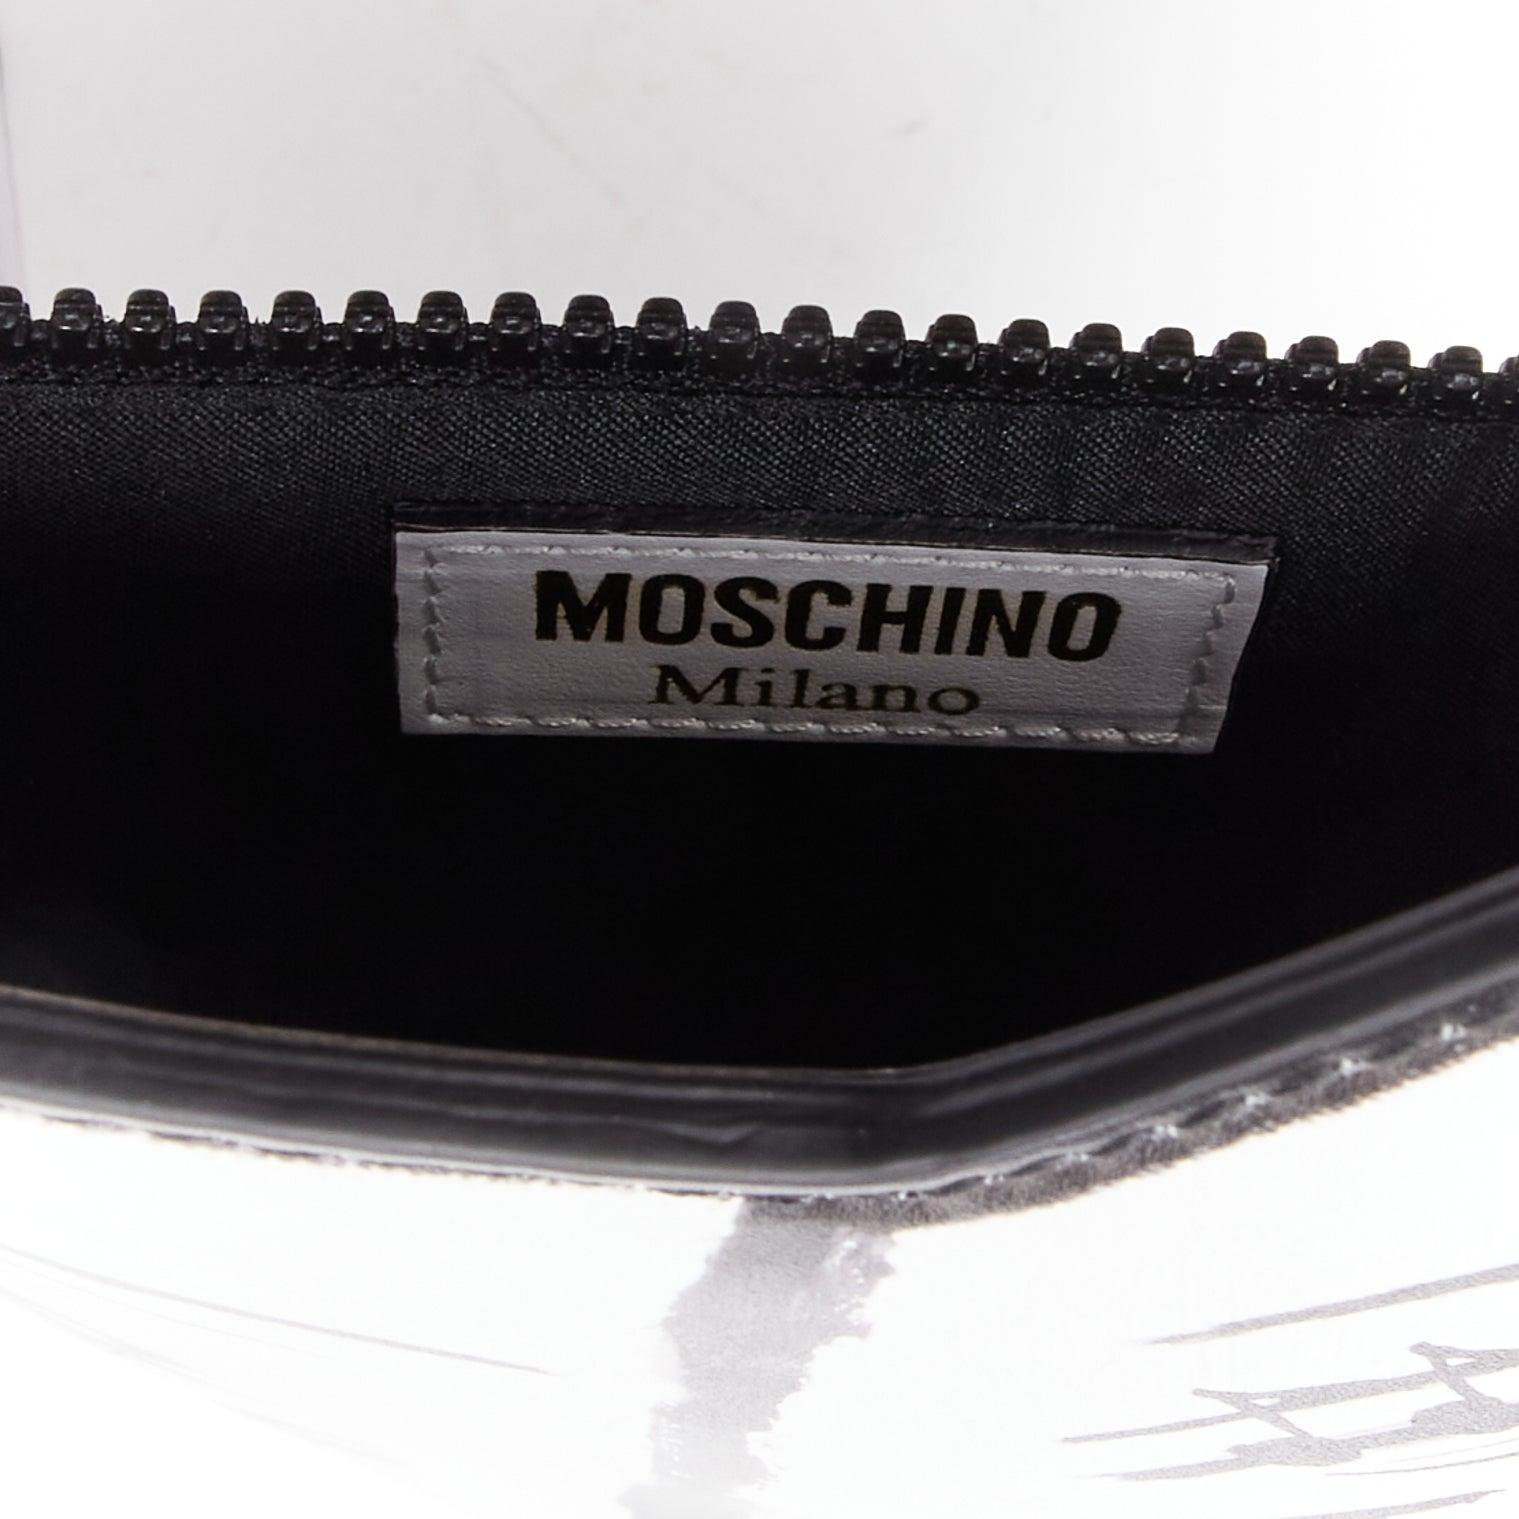 MOSCHINO COUTURE 2020 Runway Picasso Musical Note Score white leather clutch bag For Sale 3